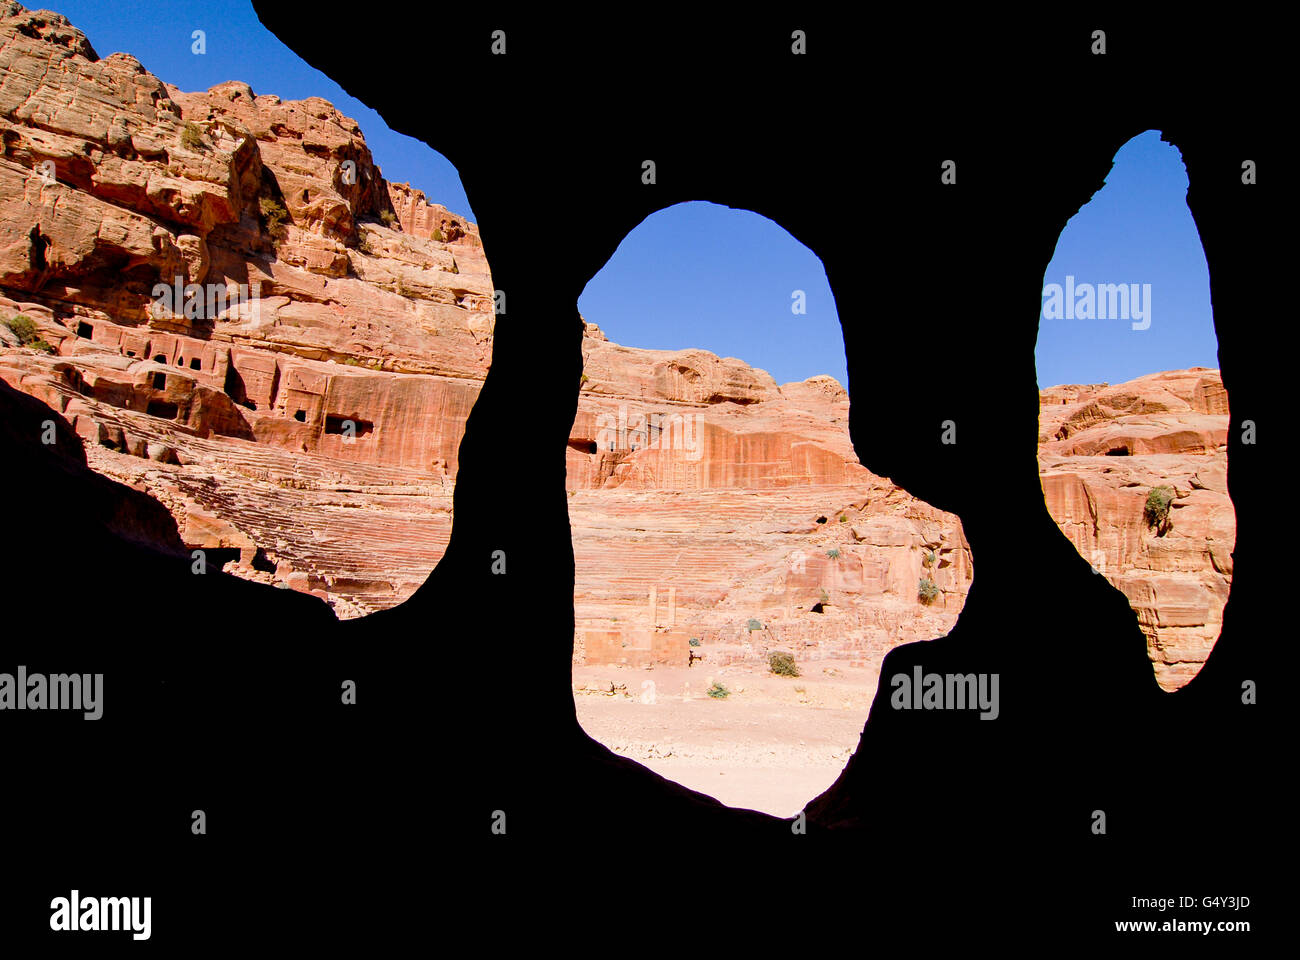 JORDAN, UNESCO world heritage archaeological site Petra, originally known as Raqmu to the Nabataeans, cave in sand stone / JORDANIEN, historische Nabataeer Stadt Petra, Hoehle im Sandstein, background backgrounds Stock Photo